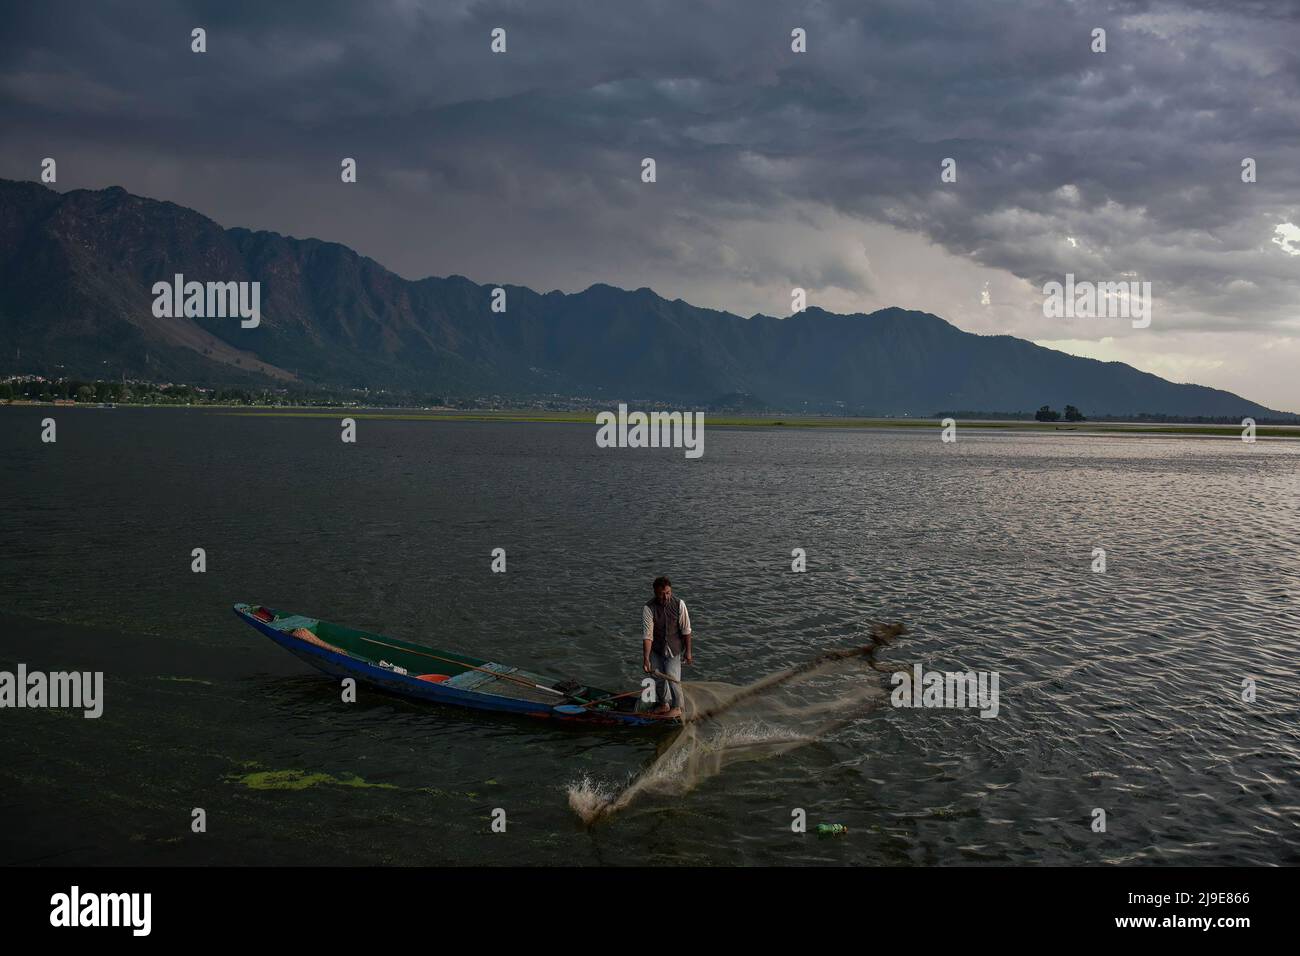 A fisherman casts his net in Dal Lake during a cloudy evening in